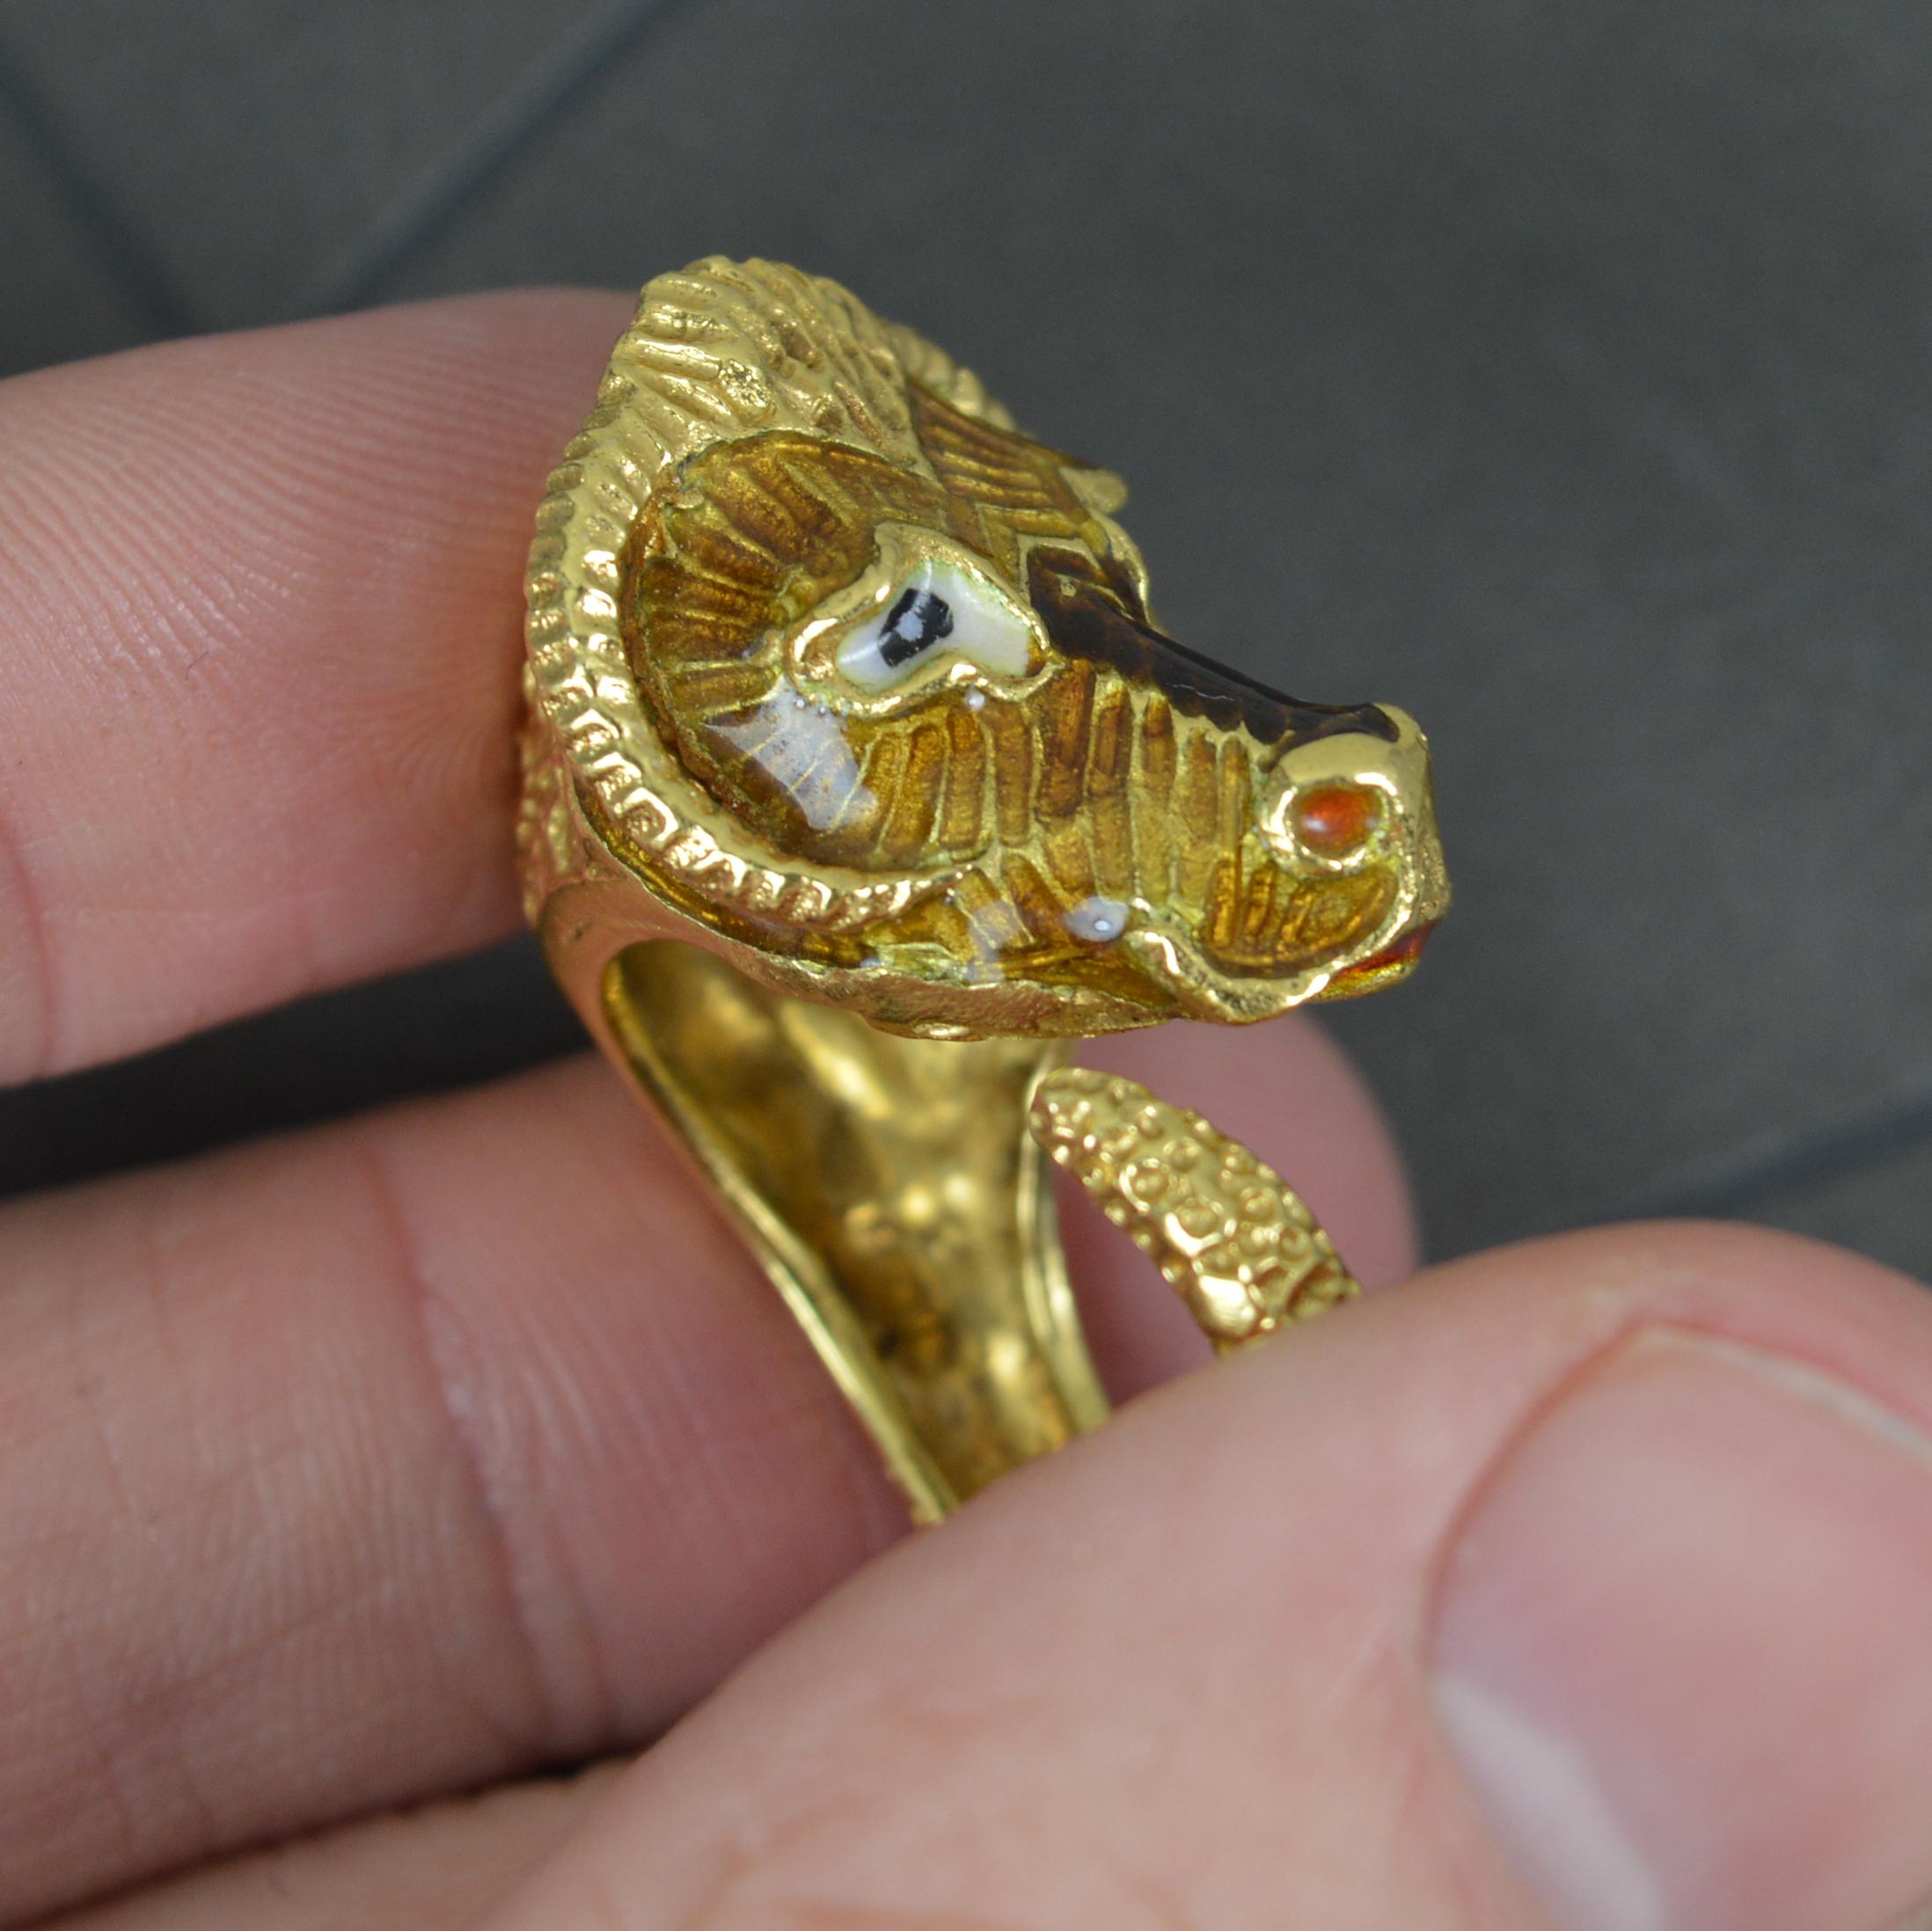 Impressive 18 Carat Gold and Enamel Ram Head Statement Ring For Sale 1